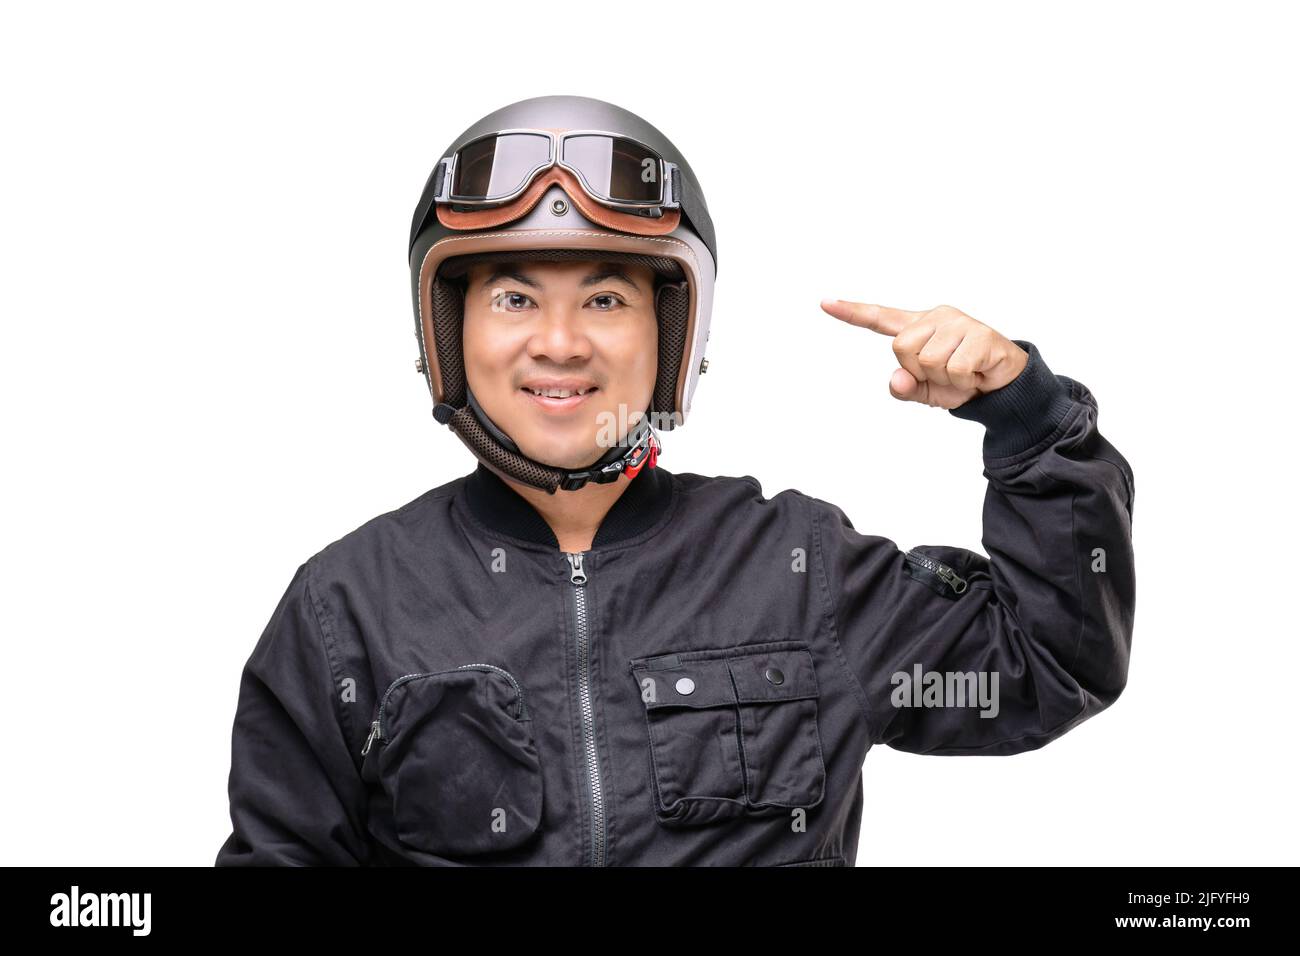 Motorcyclist or rider wearing vintage helmet. Safe ride campaign concept. Studio shot isolated on white background Stock Photo